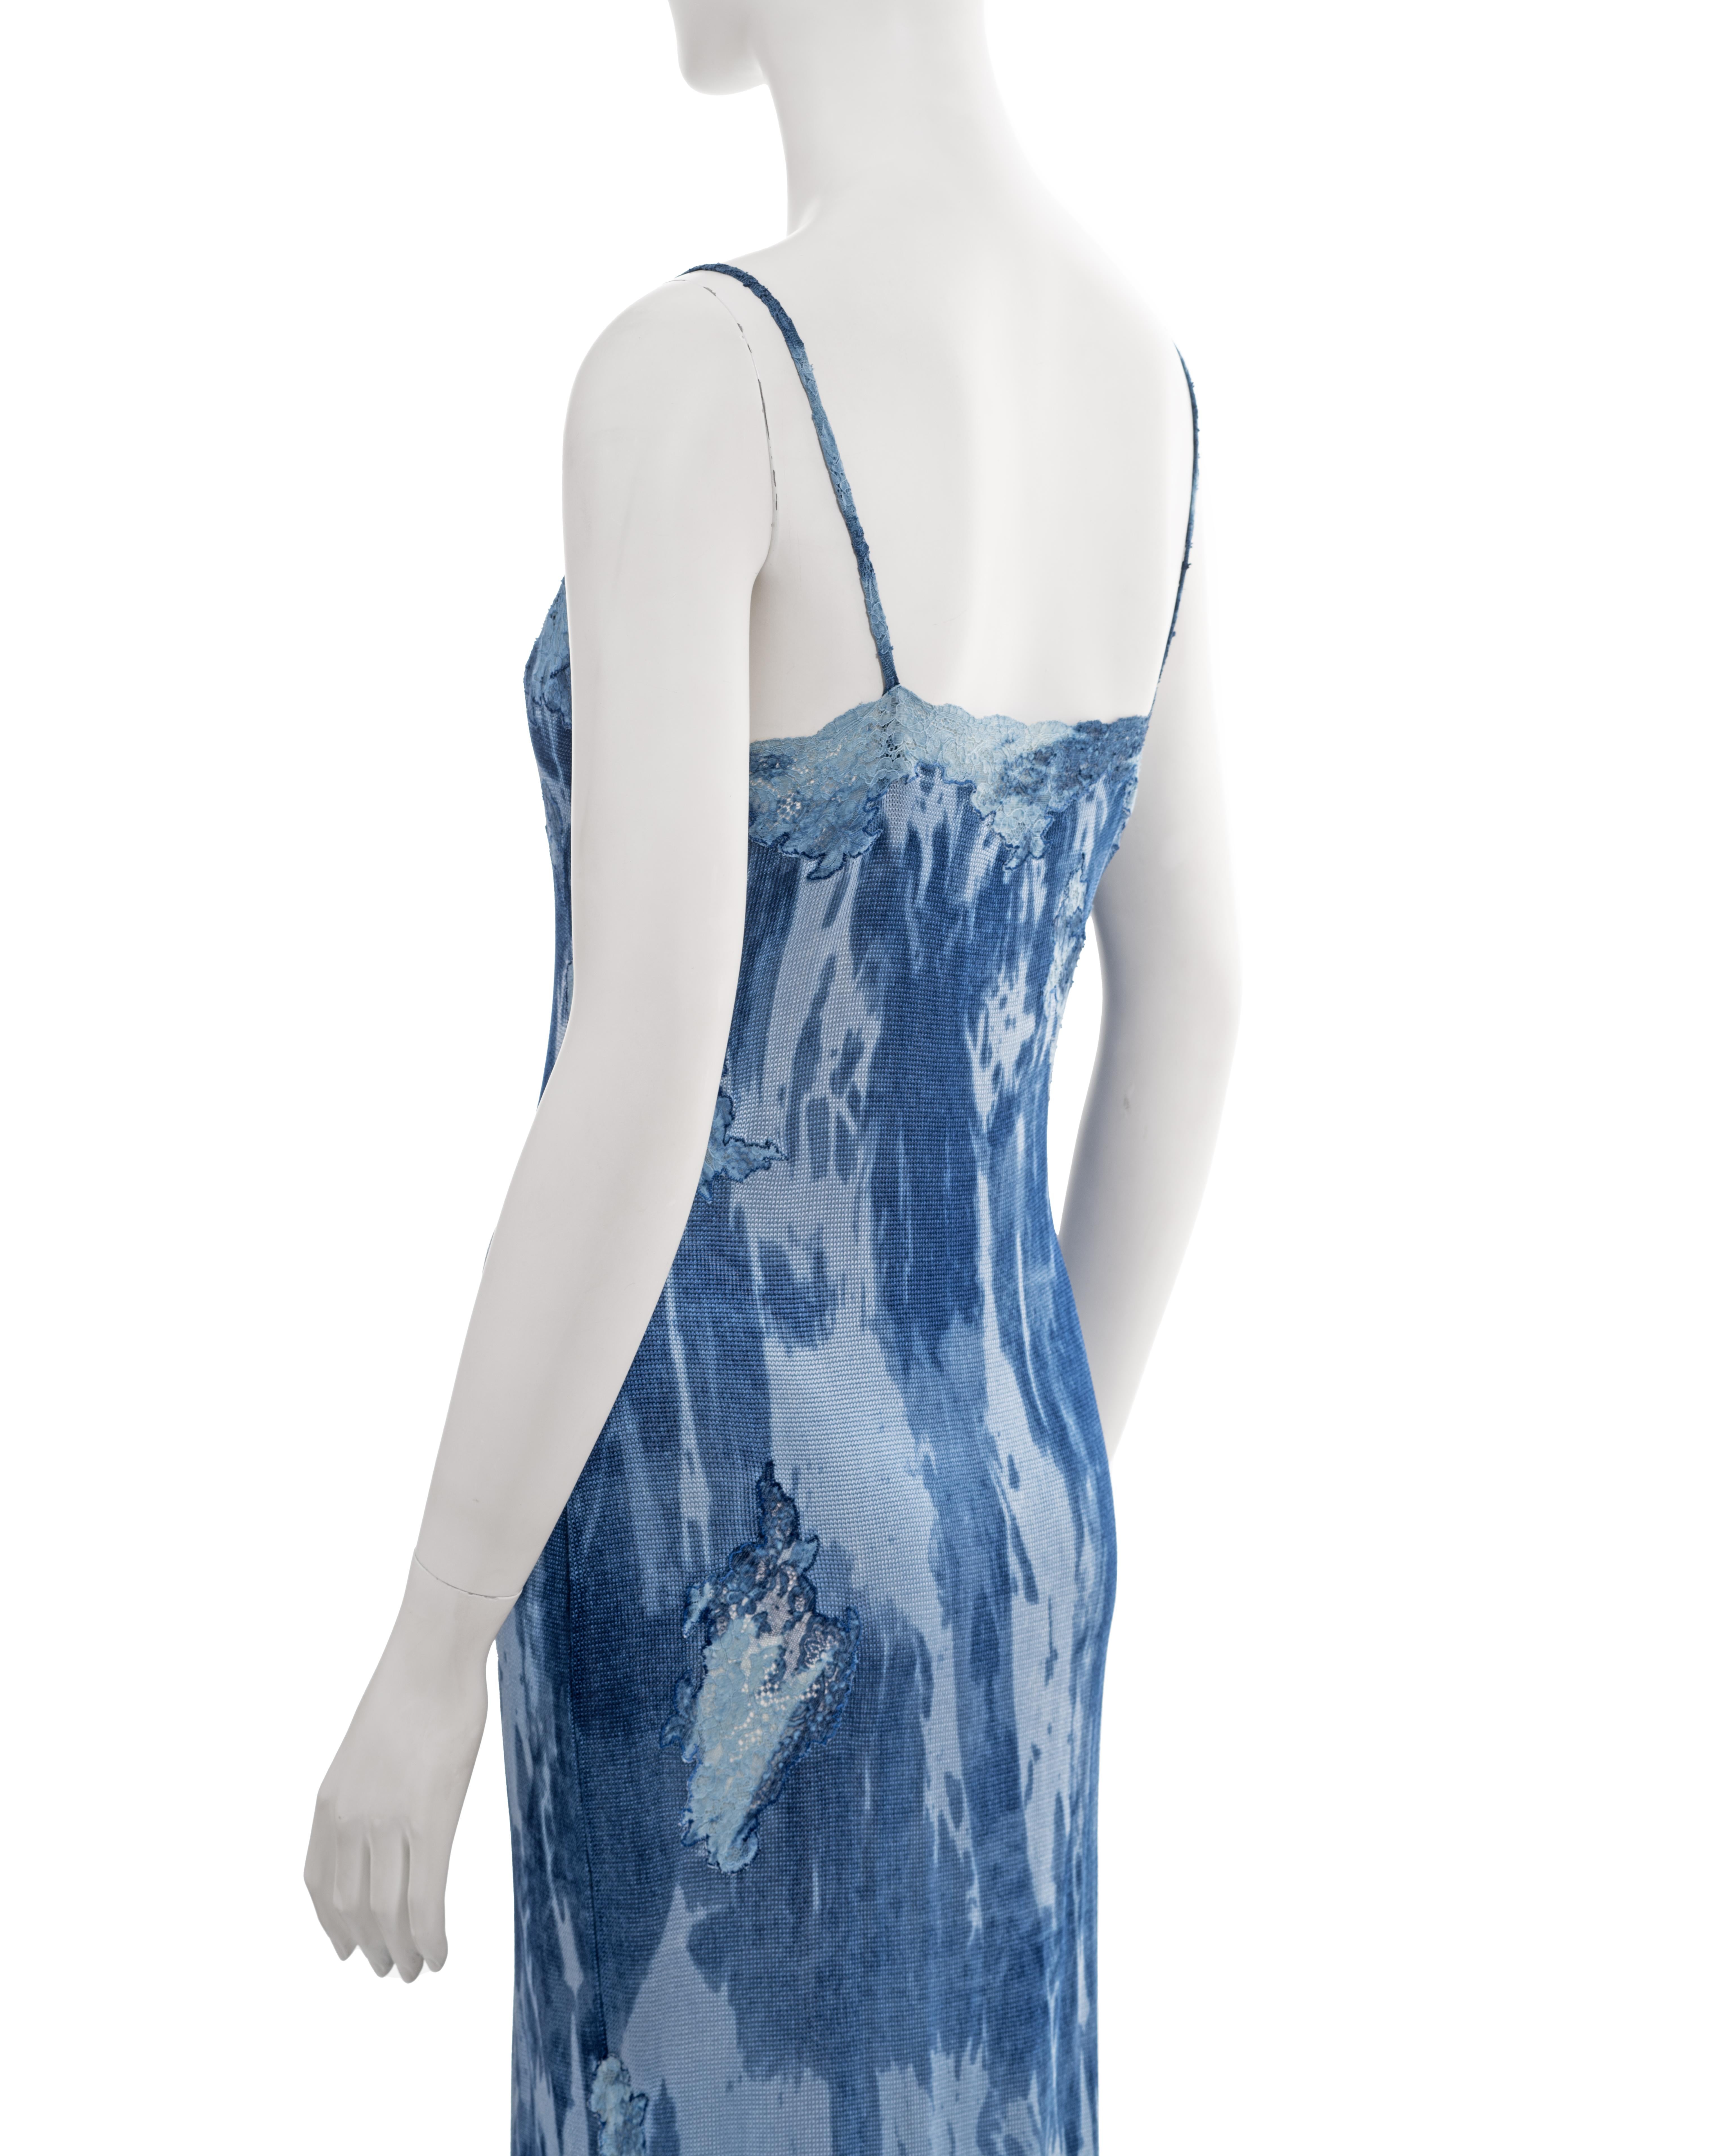 Christian Dior by John Galliano blue denim knit and lace evening dress, fw 2000 For Sale 6